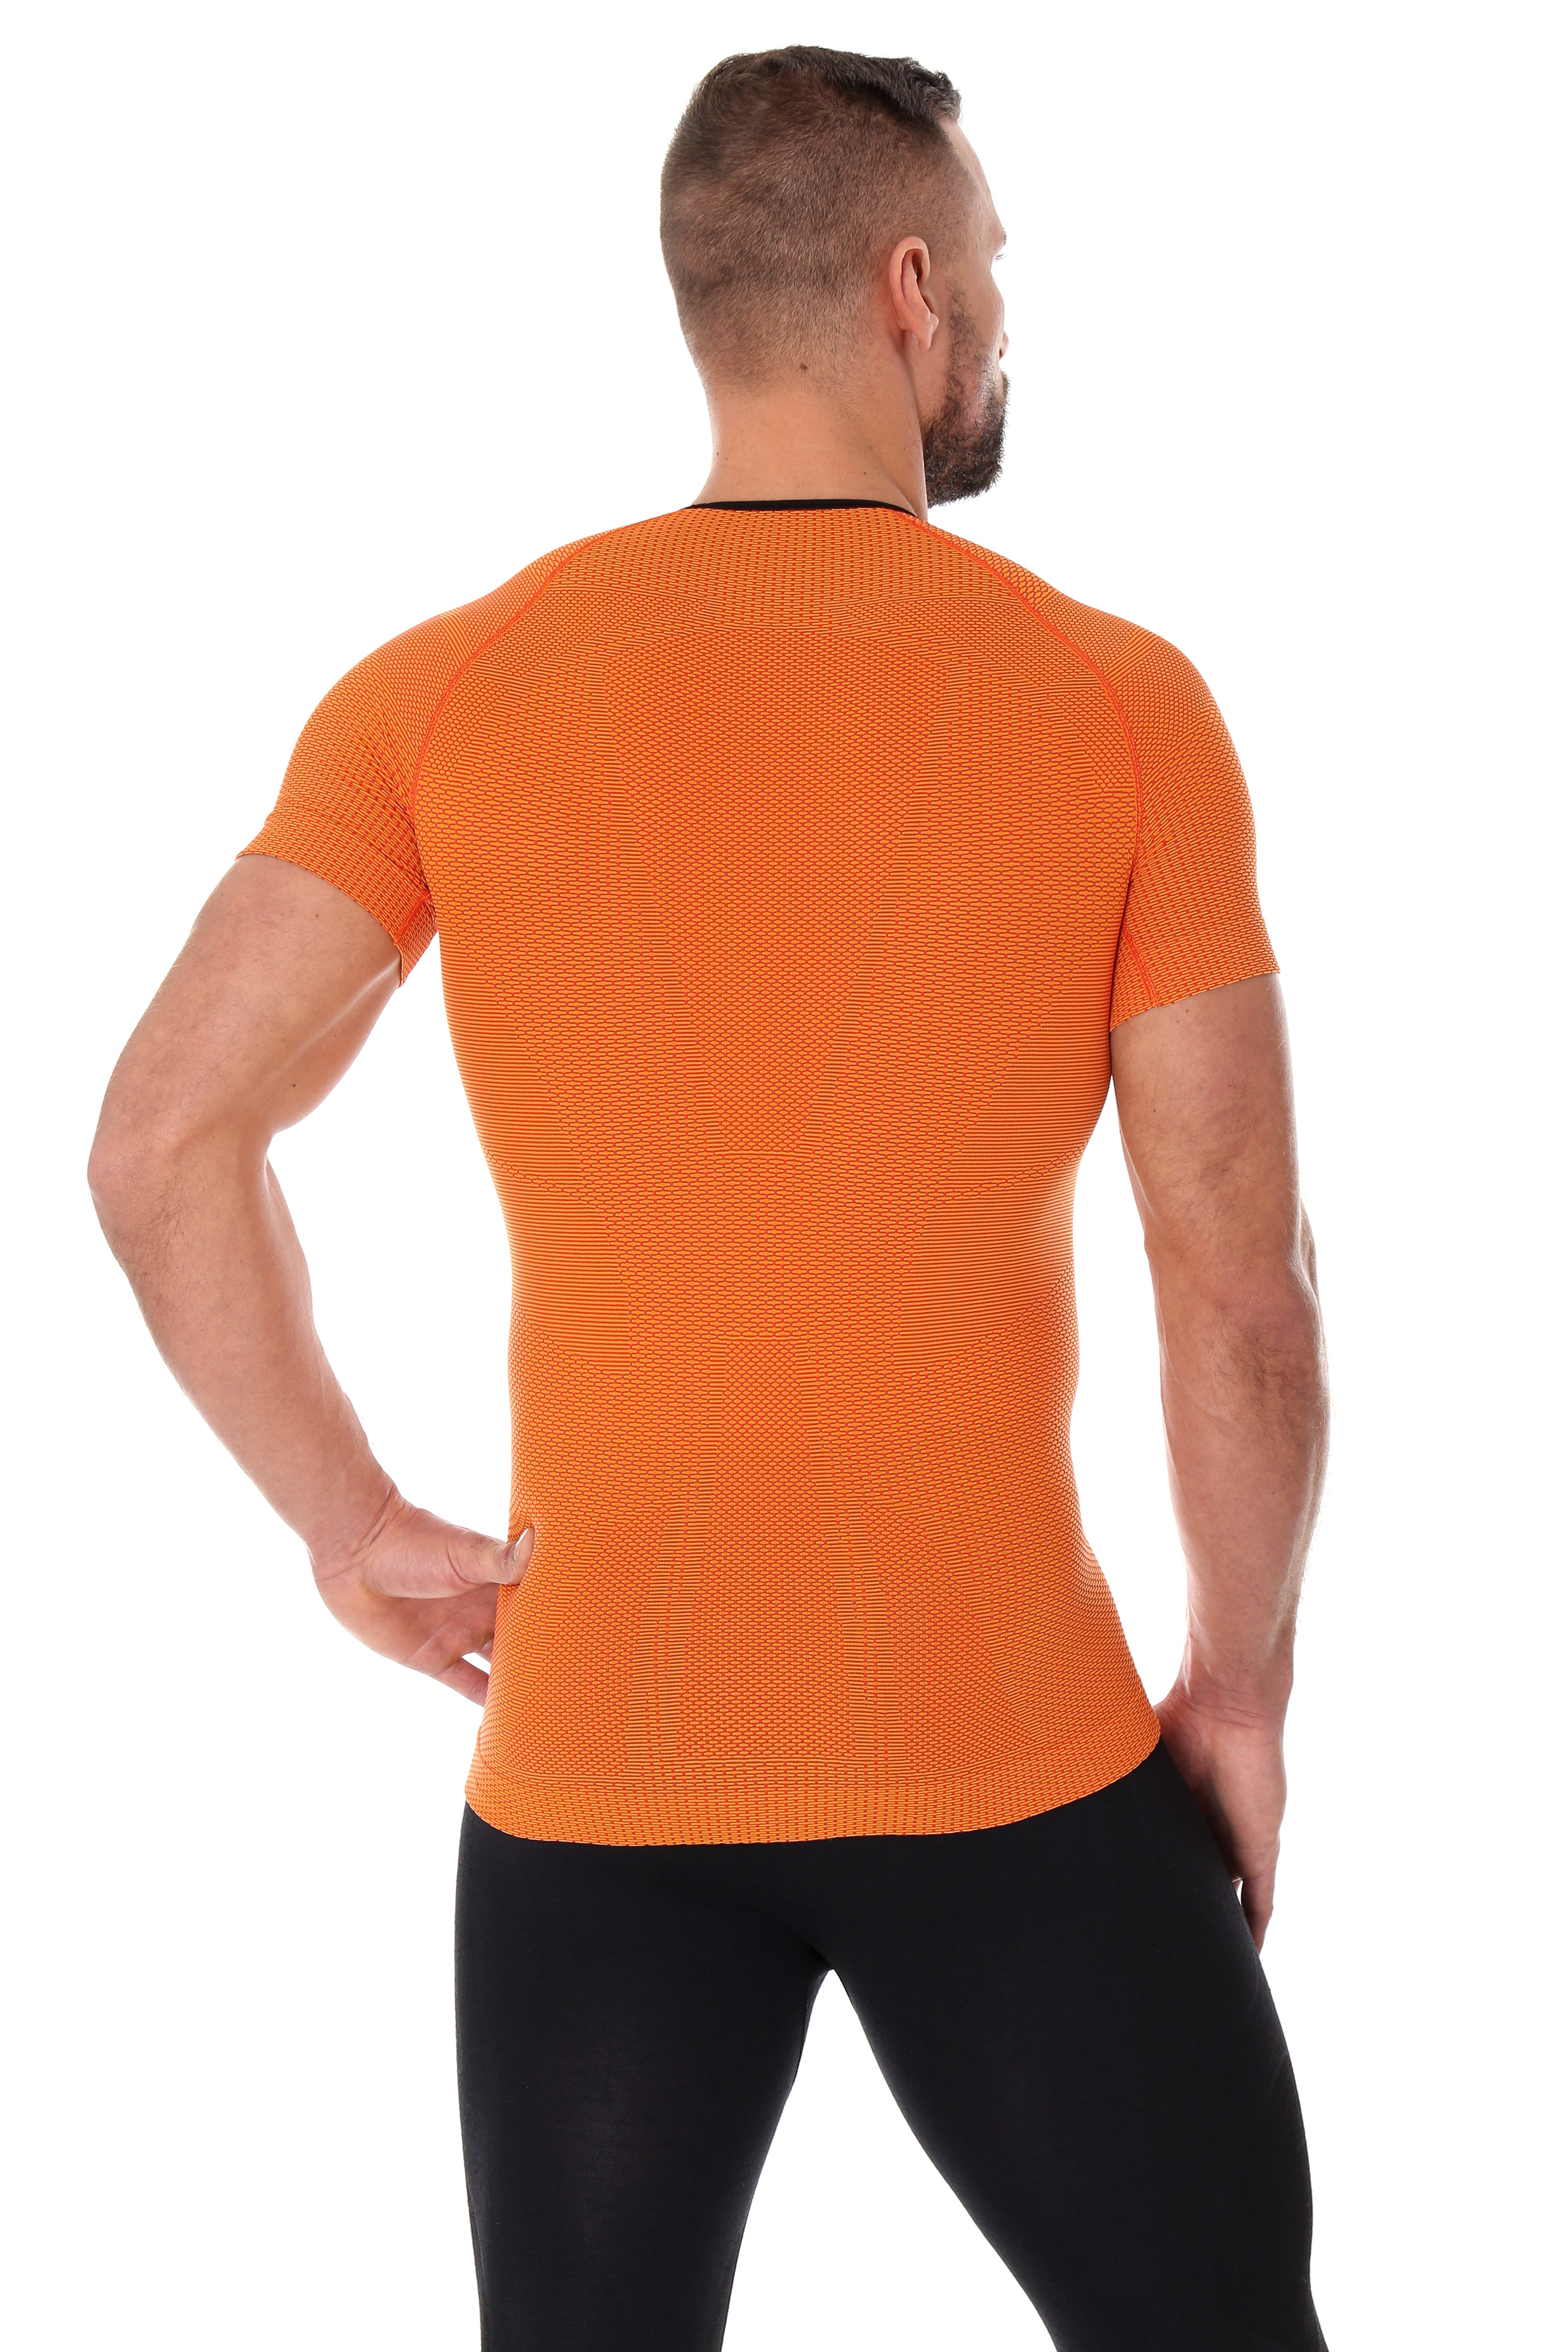 Men's orange 3D RUN PRO short-sleeved t-shirt. The fitted base layer features the logo centred on the chest, and black trim around the neck